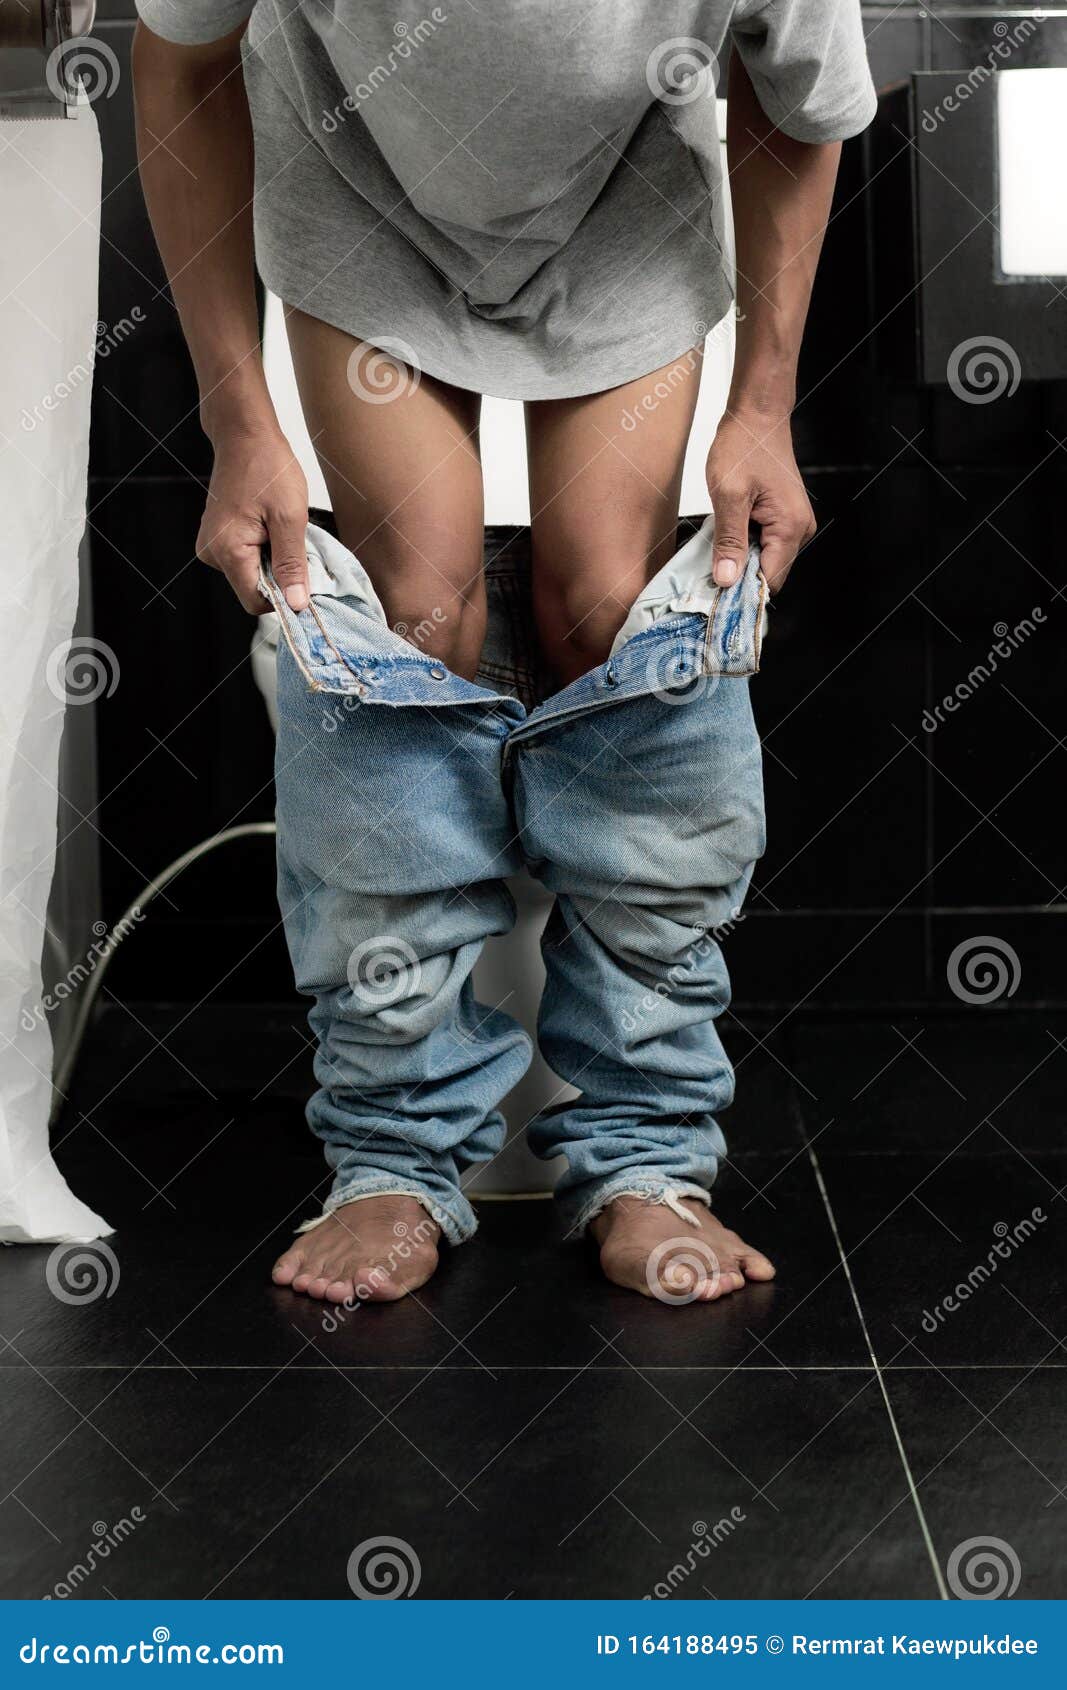 Man Removing His Underwear in Bathroom Stock Image - Image of hold